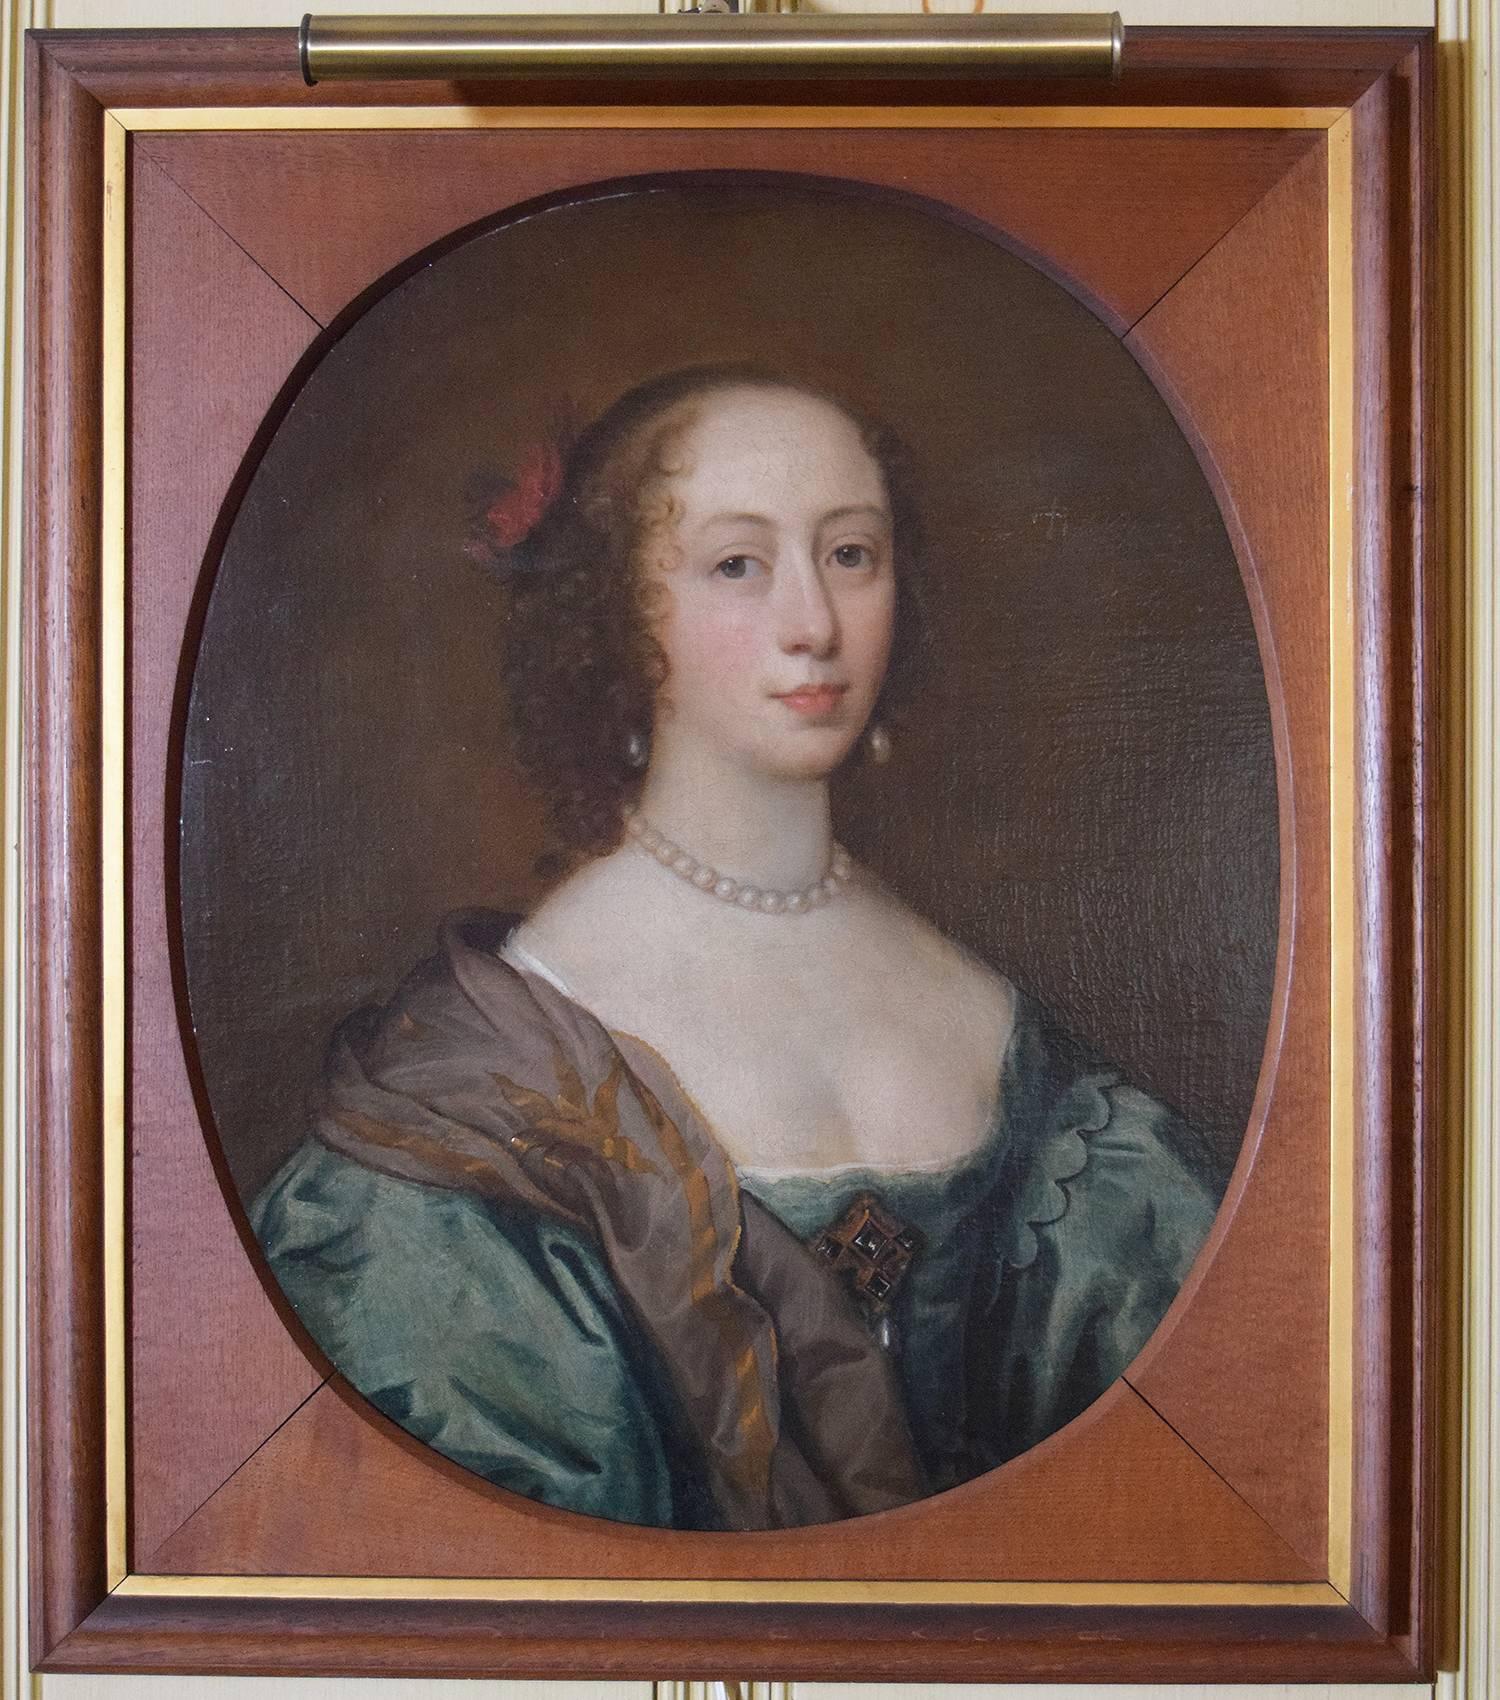 Unknown Portrait Painting - 17thc. British School Portrait of a Young Woman